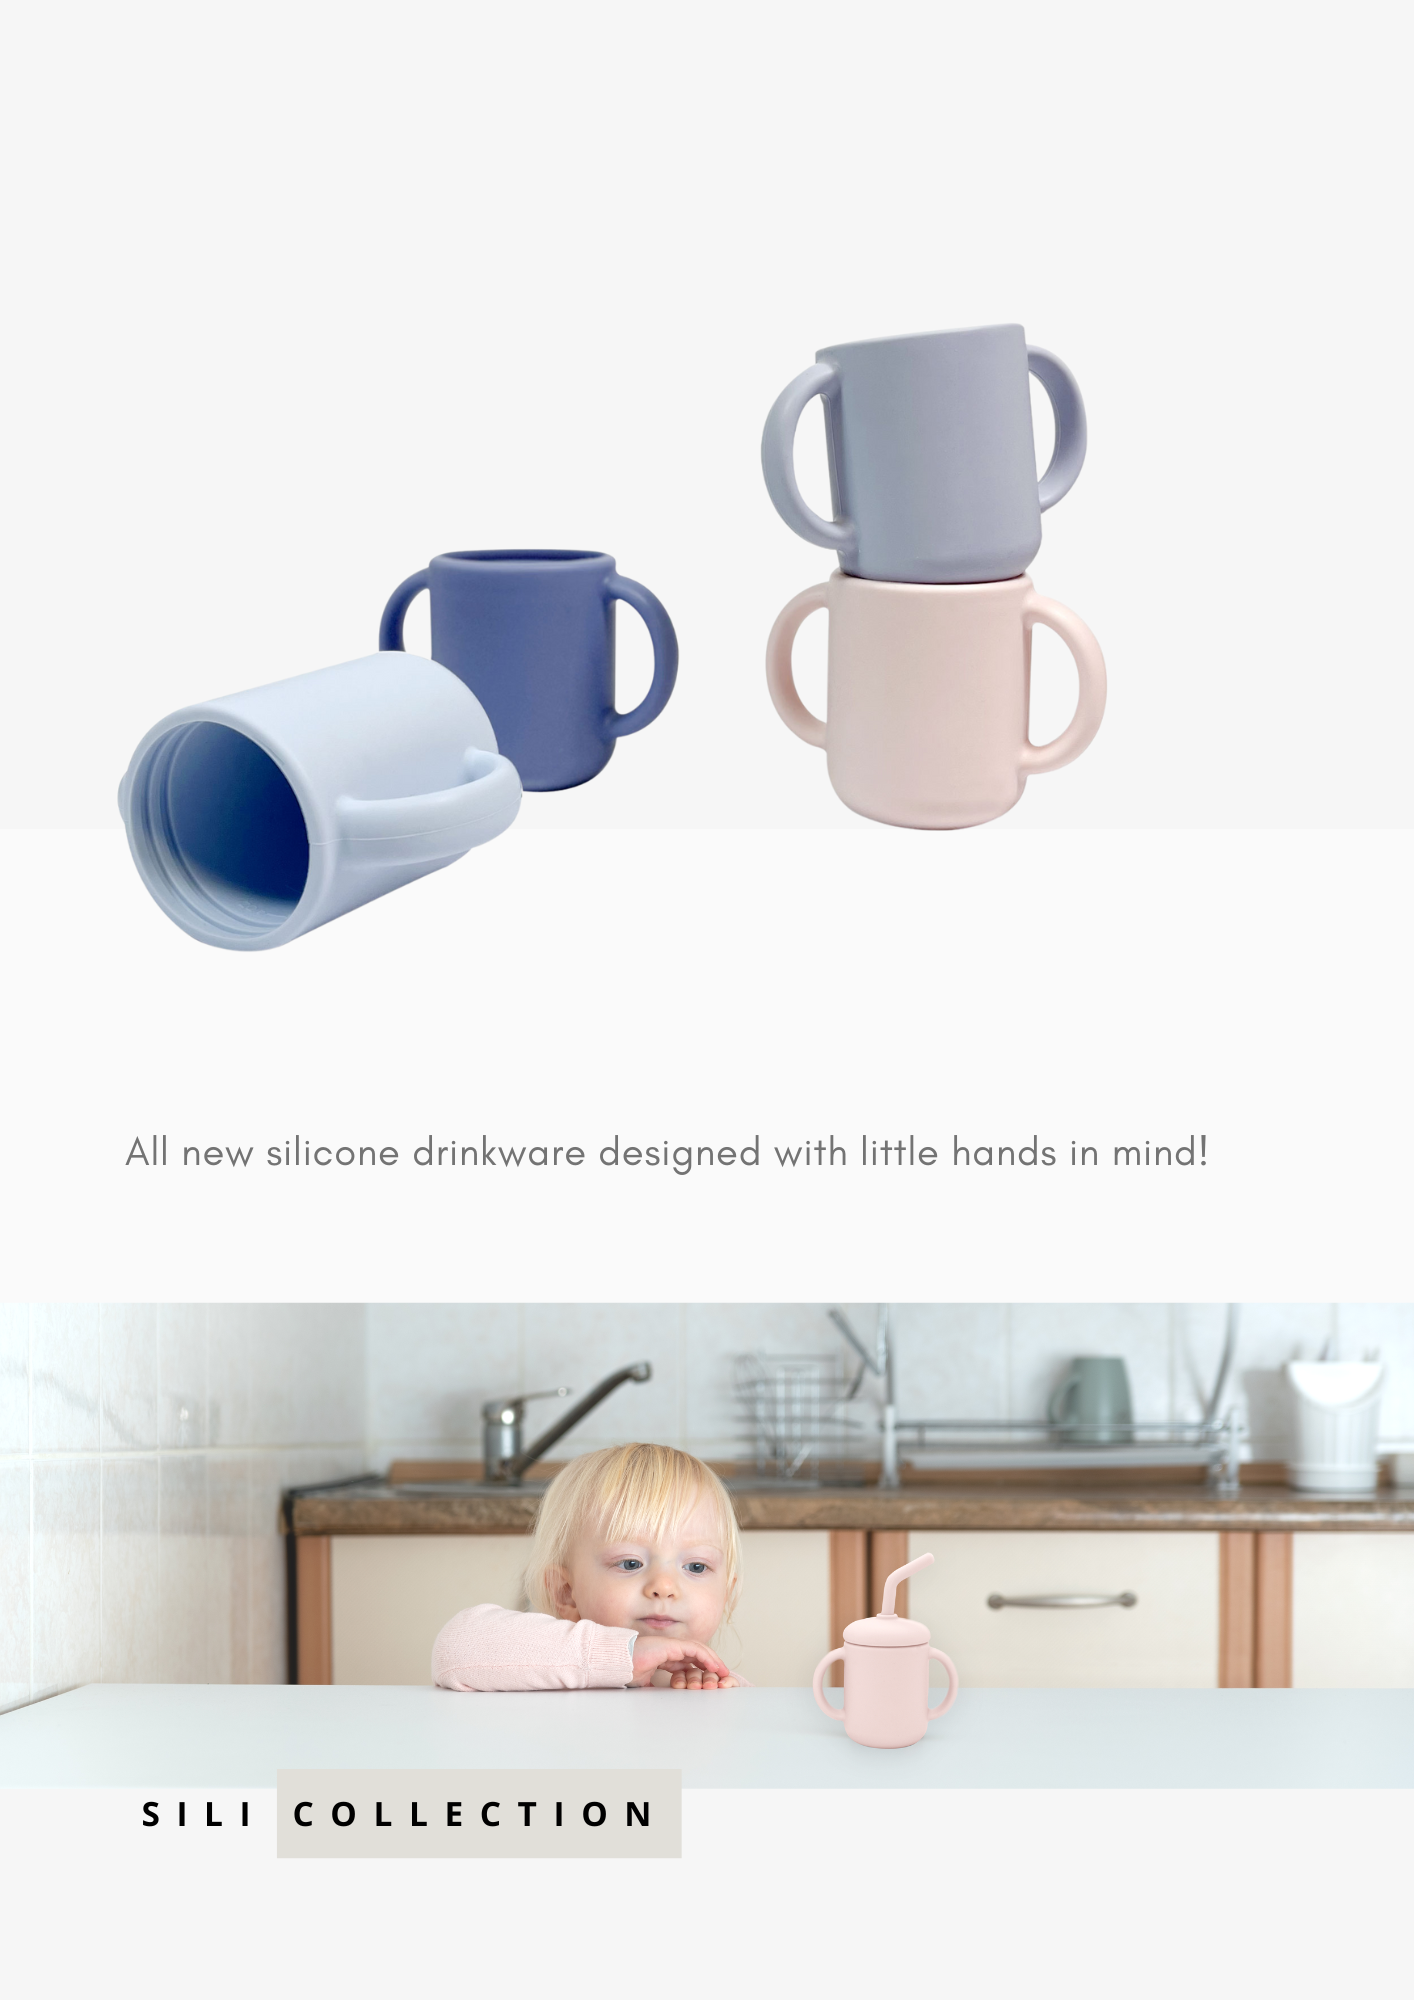 All new silicone drinkware designed with little hands in mind!